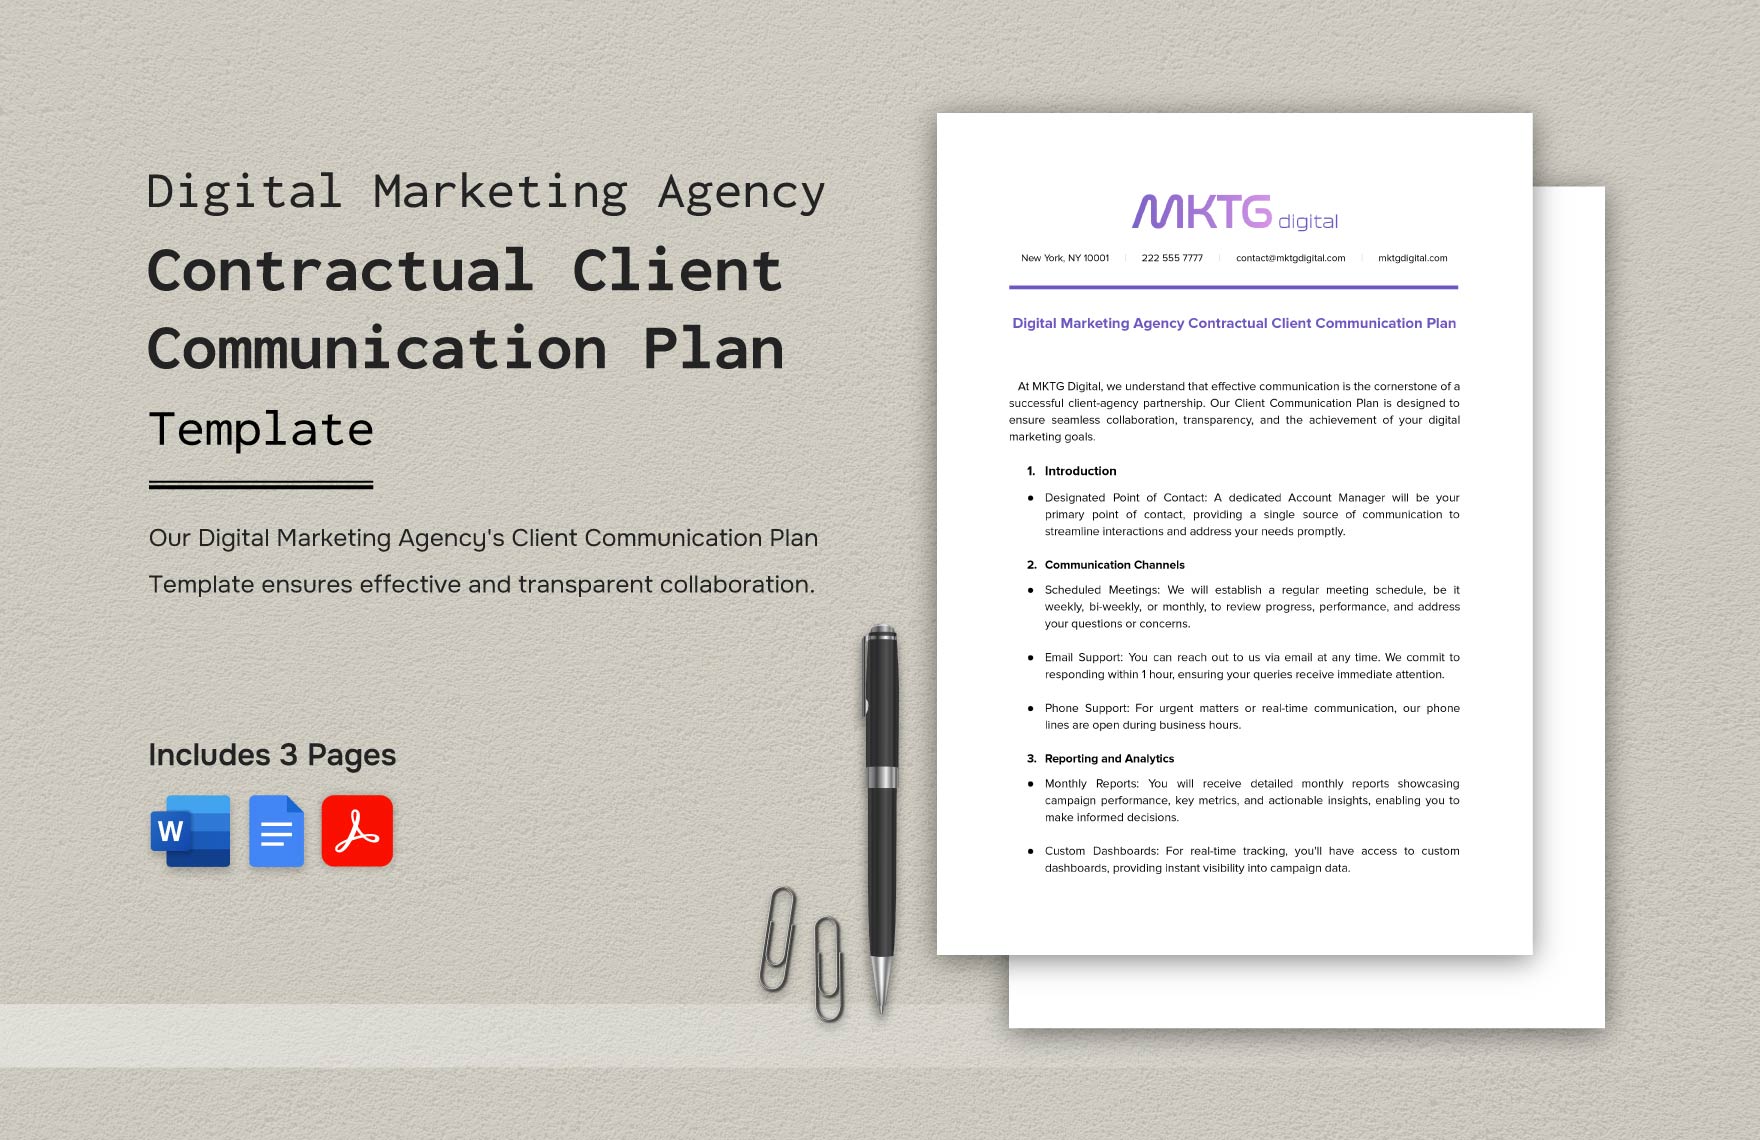 Digital Marketing Agency Contractual Client Communication Plan Template